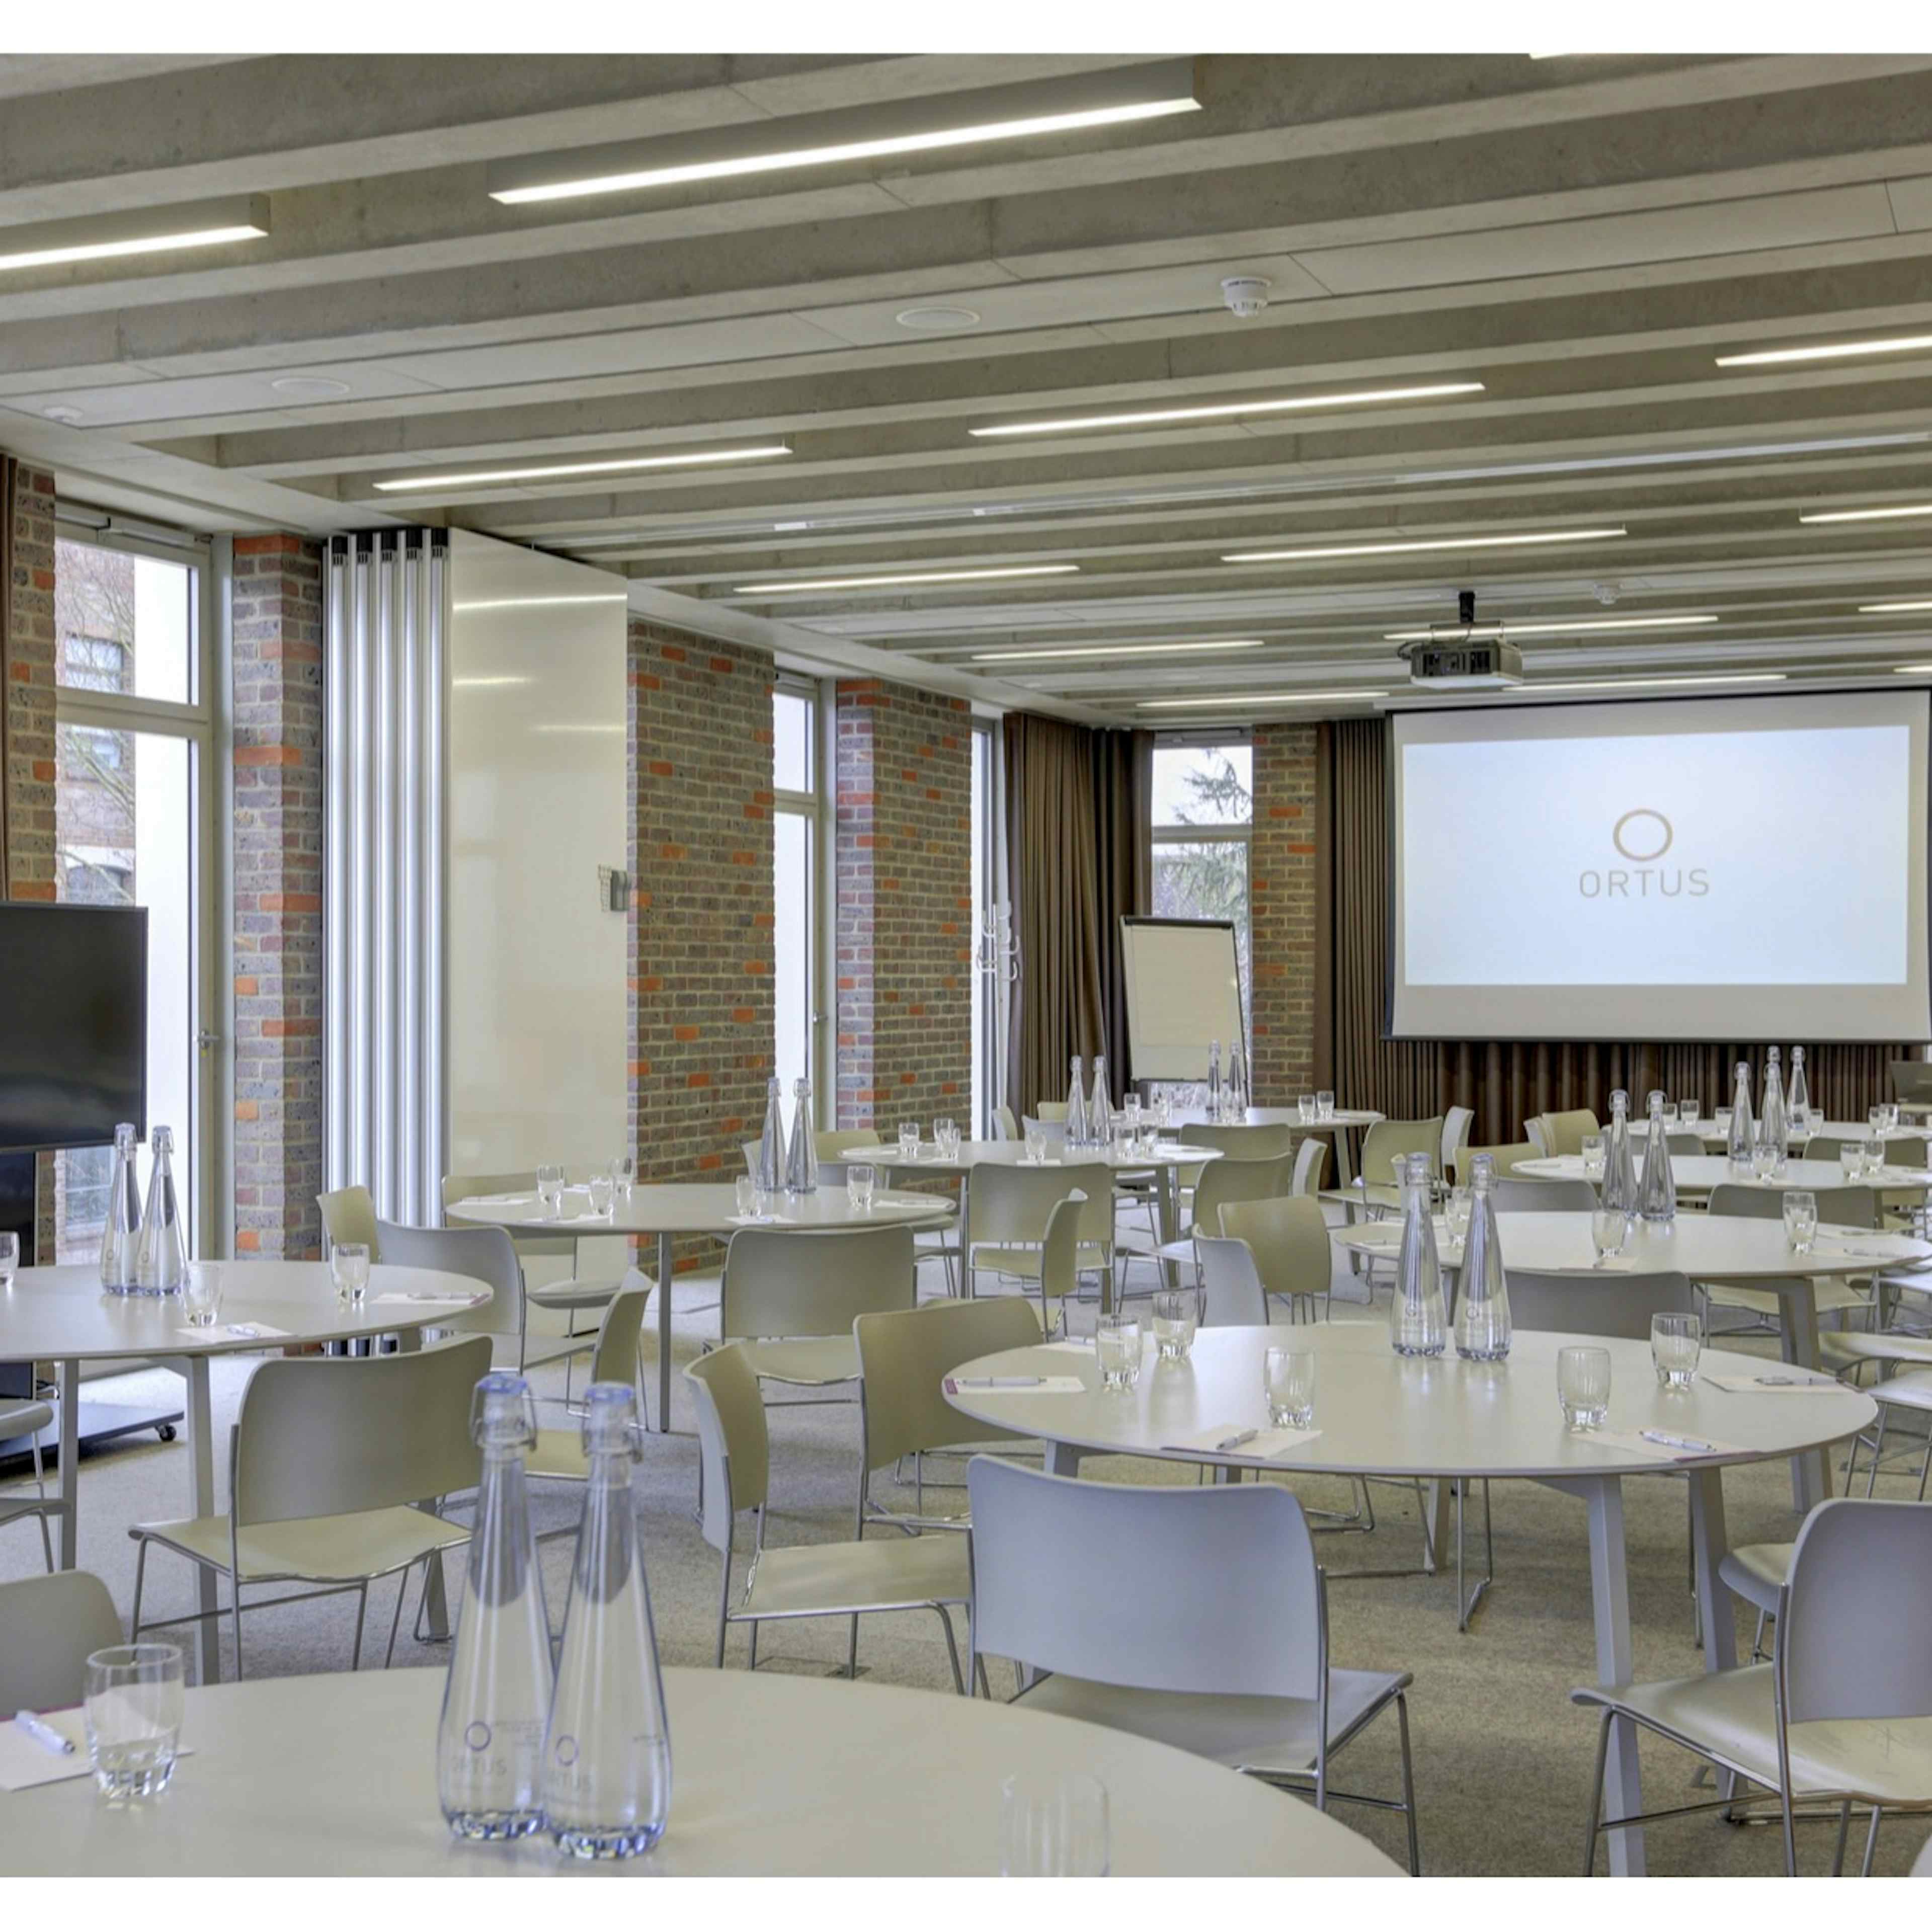 ORTUS Conference and Events Venue - Buddy image 1